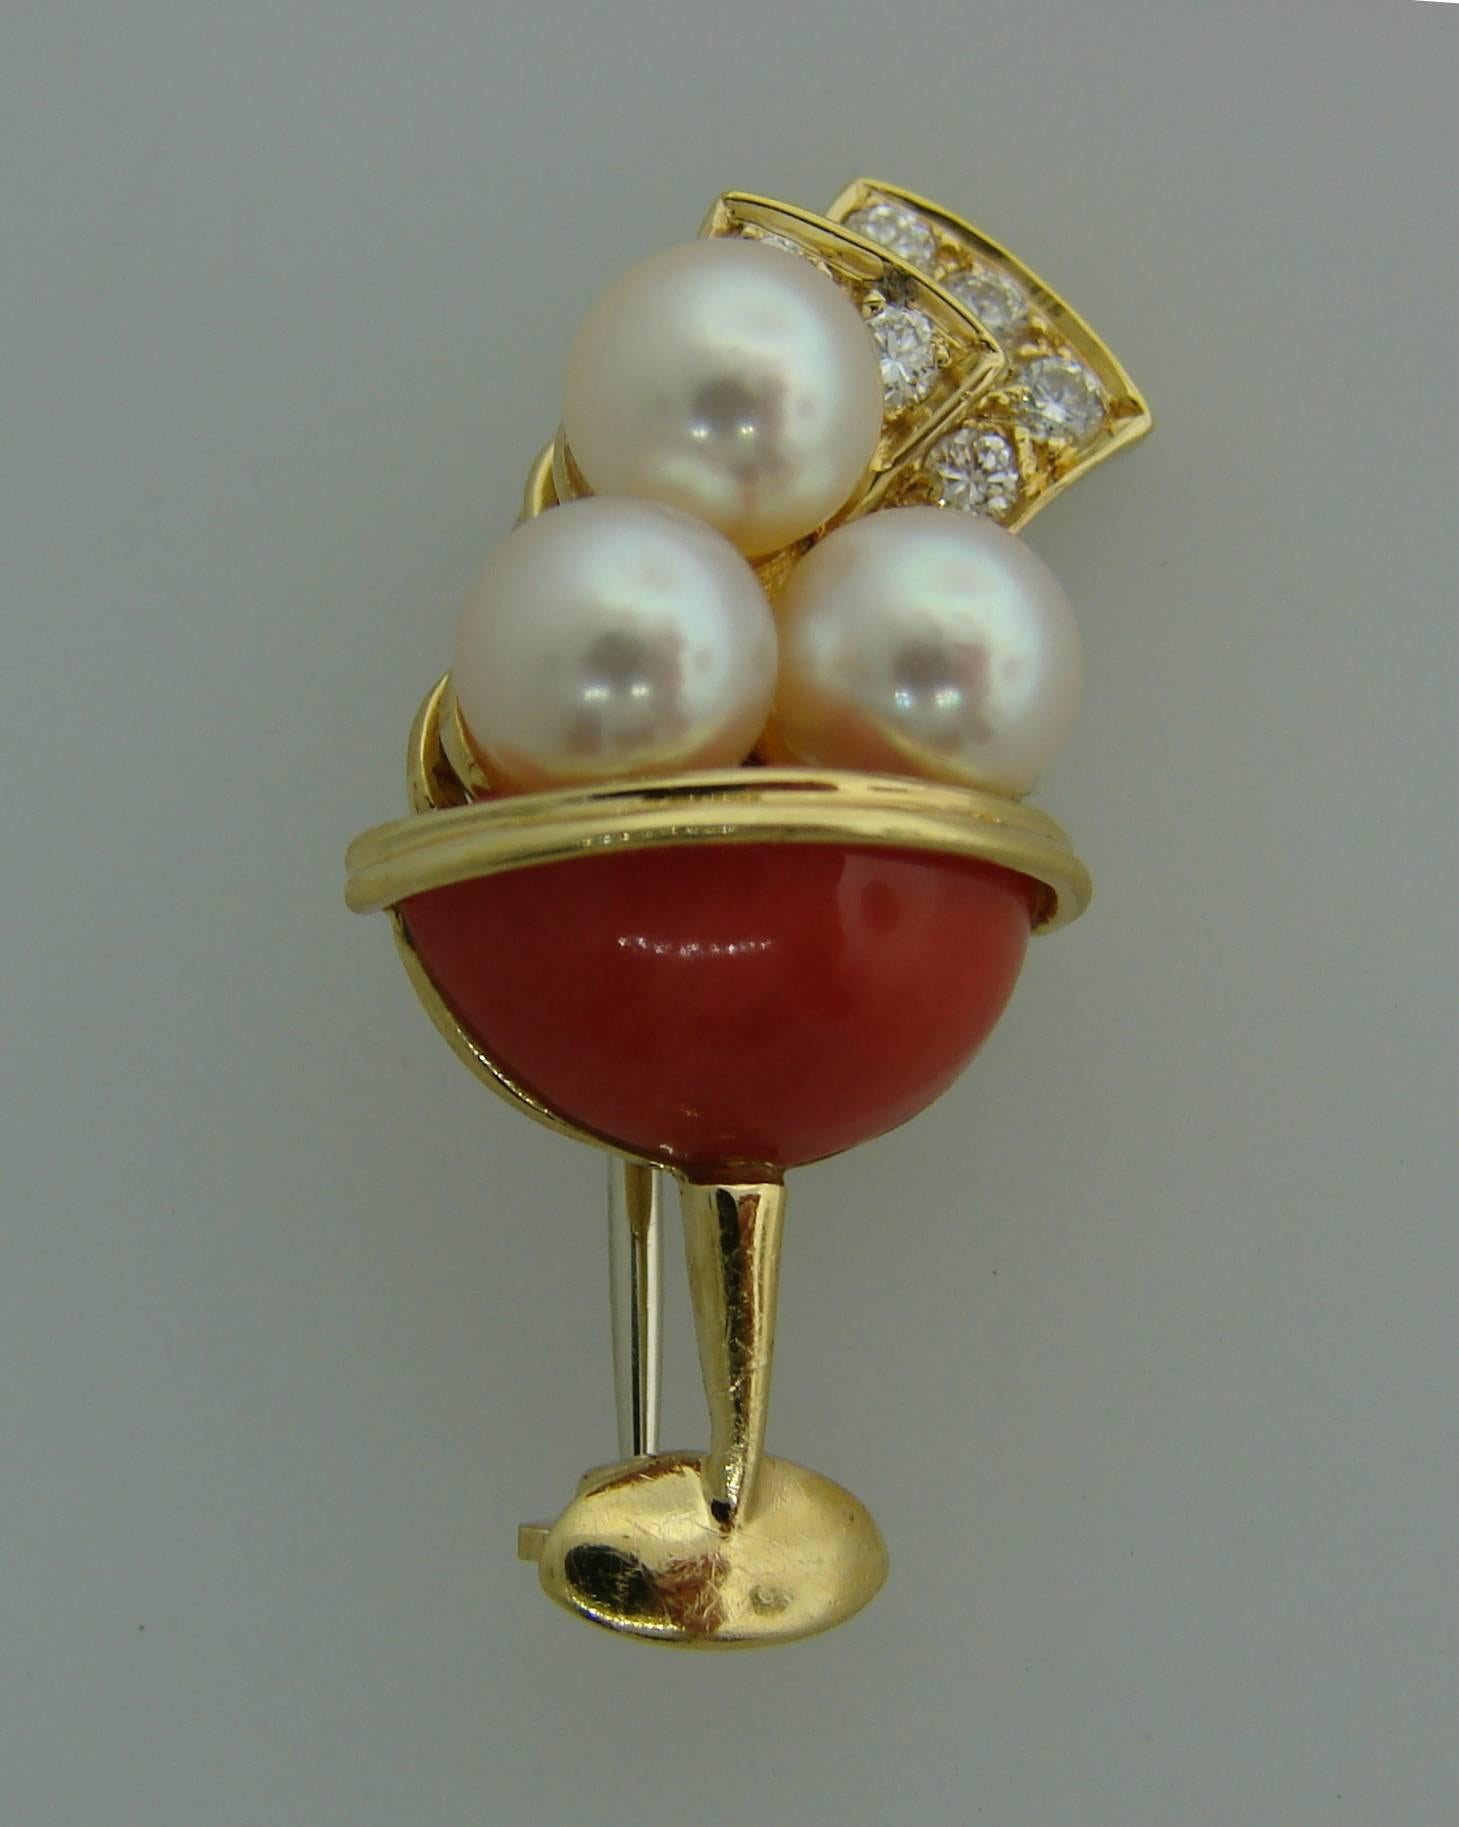 Cutest clip created by Van Cleef & Arpels in France in the 1950's. Adorable, chic and wearable, the pin is a great addition to your jewelry collection. It makes a tasteful accent to any outfit.
The clip is made of 18 karat yellow gold, coral, and